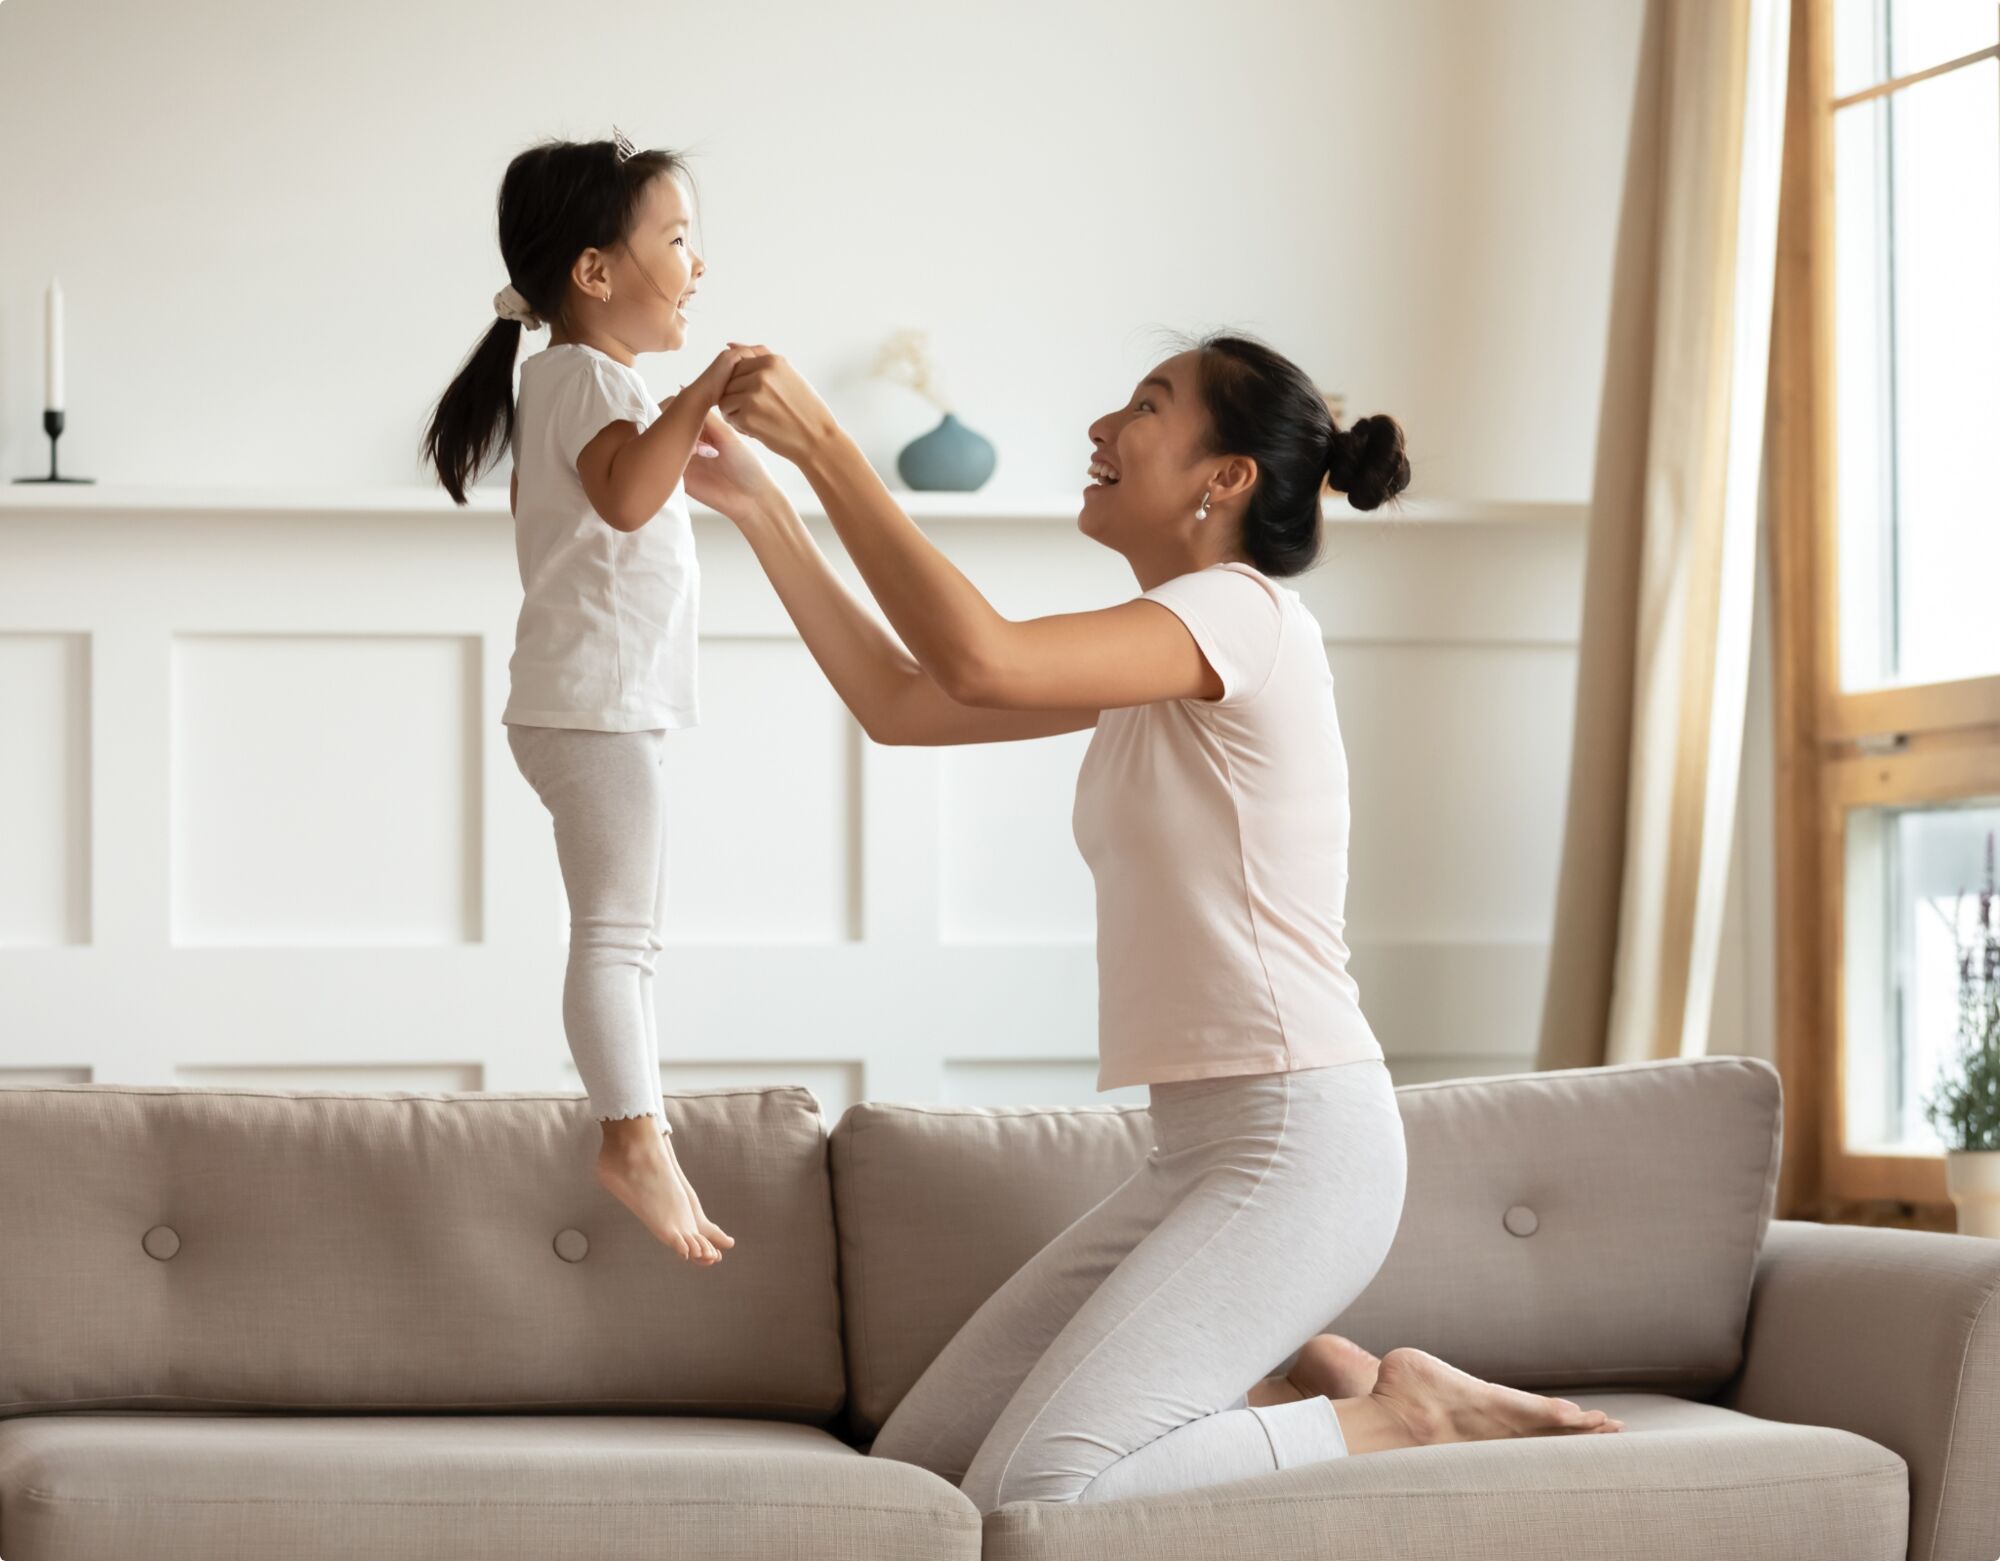 A mother playing with her daughter on a couch